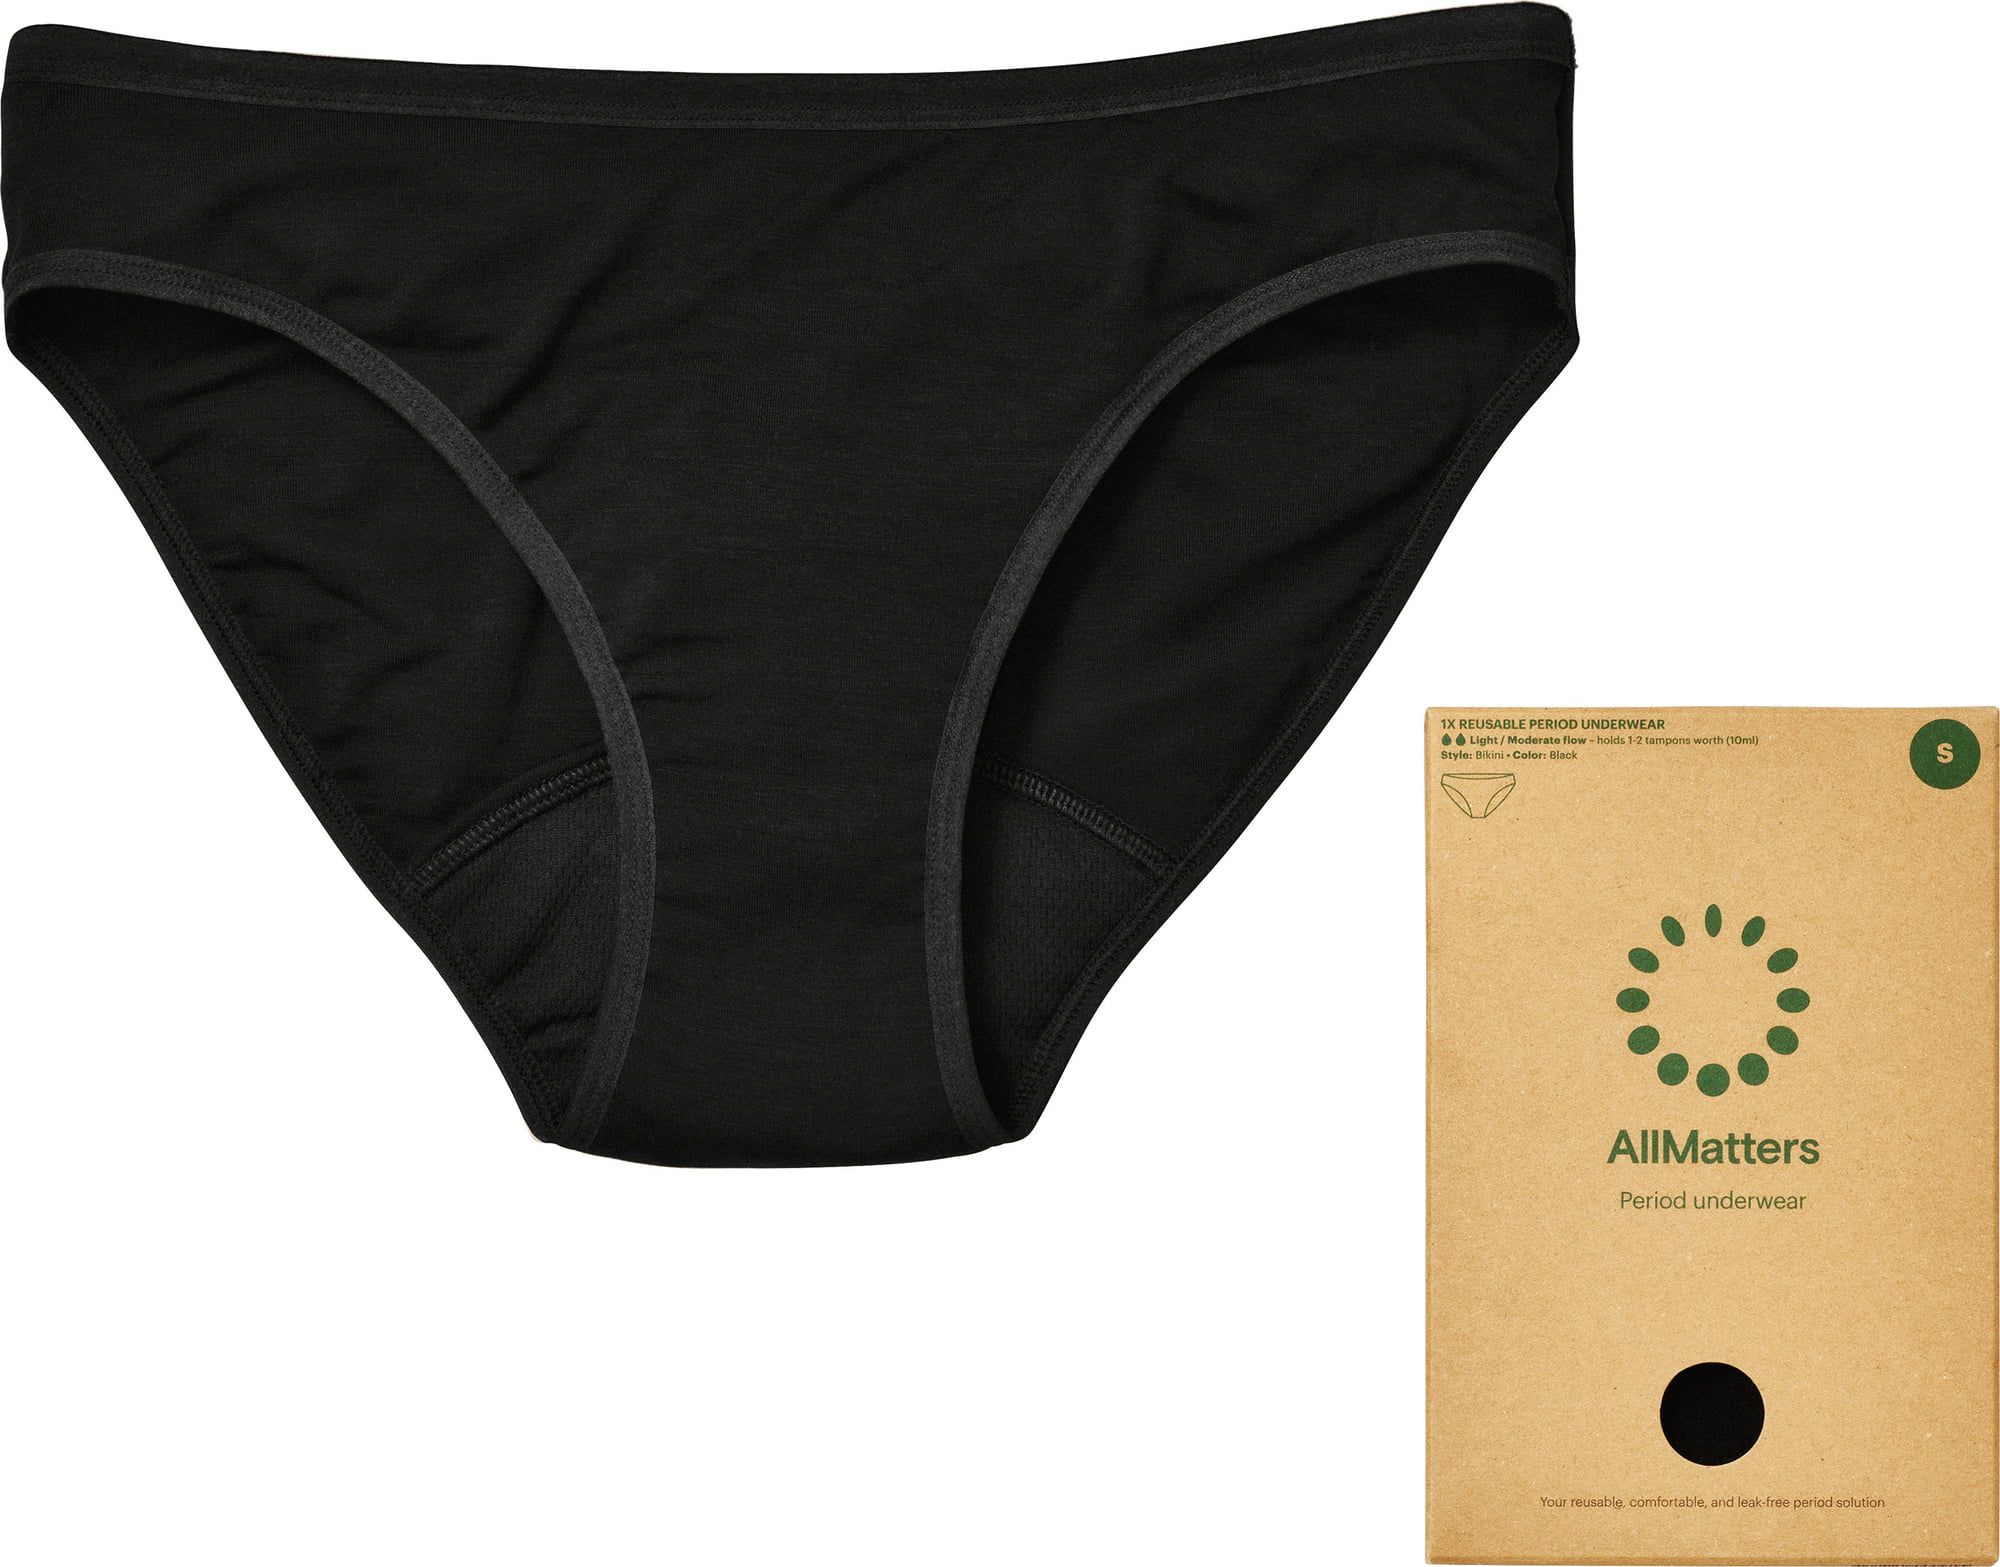 Buy Sanity Leakproof and Reusable Period Panties - Size M Online